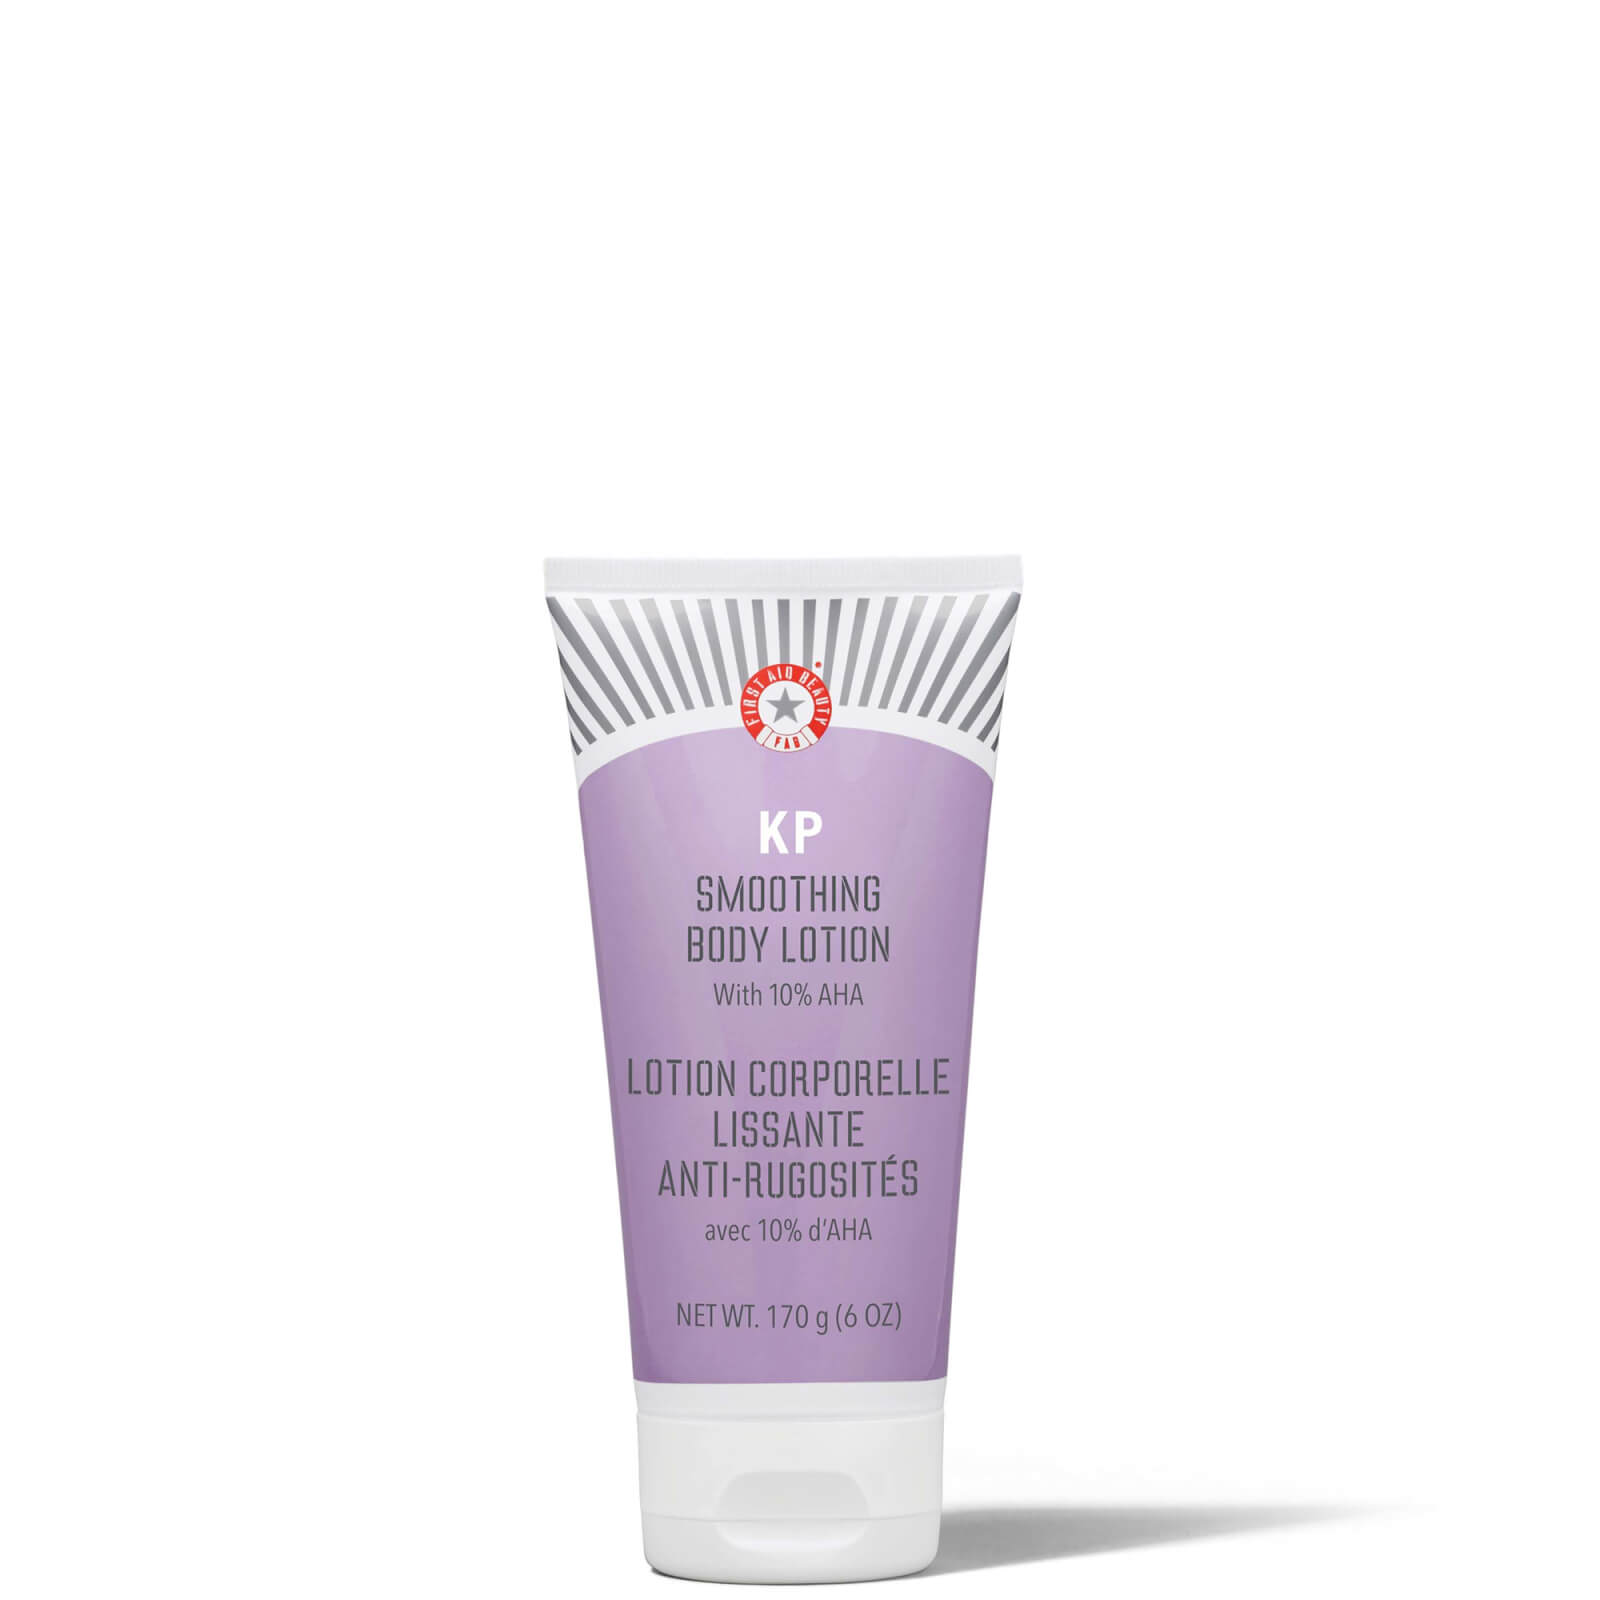 Image of First Aid Beauty KP Smoothing Body Lotion with 10% AHA 170g